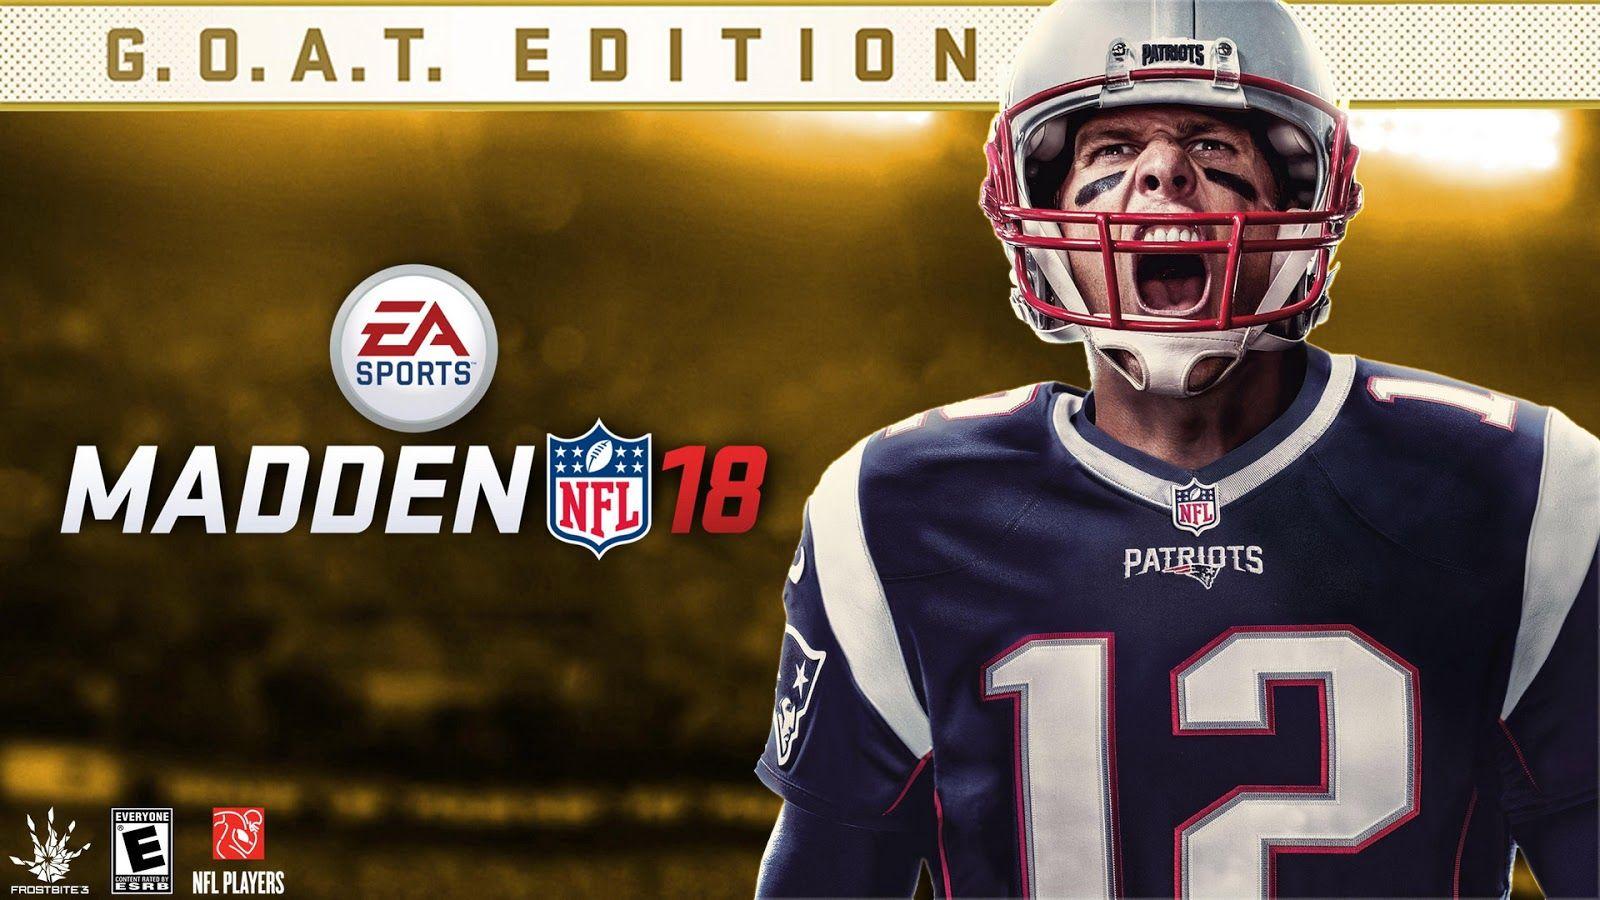 Madden NFL 18 HD Wallpaper 1920x1080 games review, play